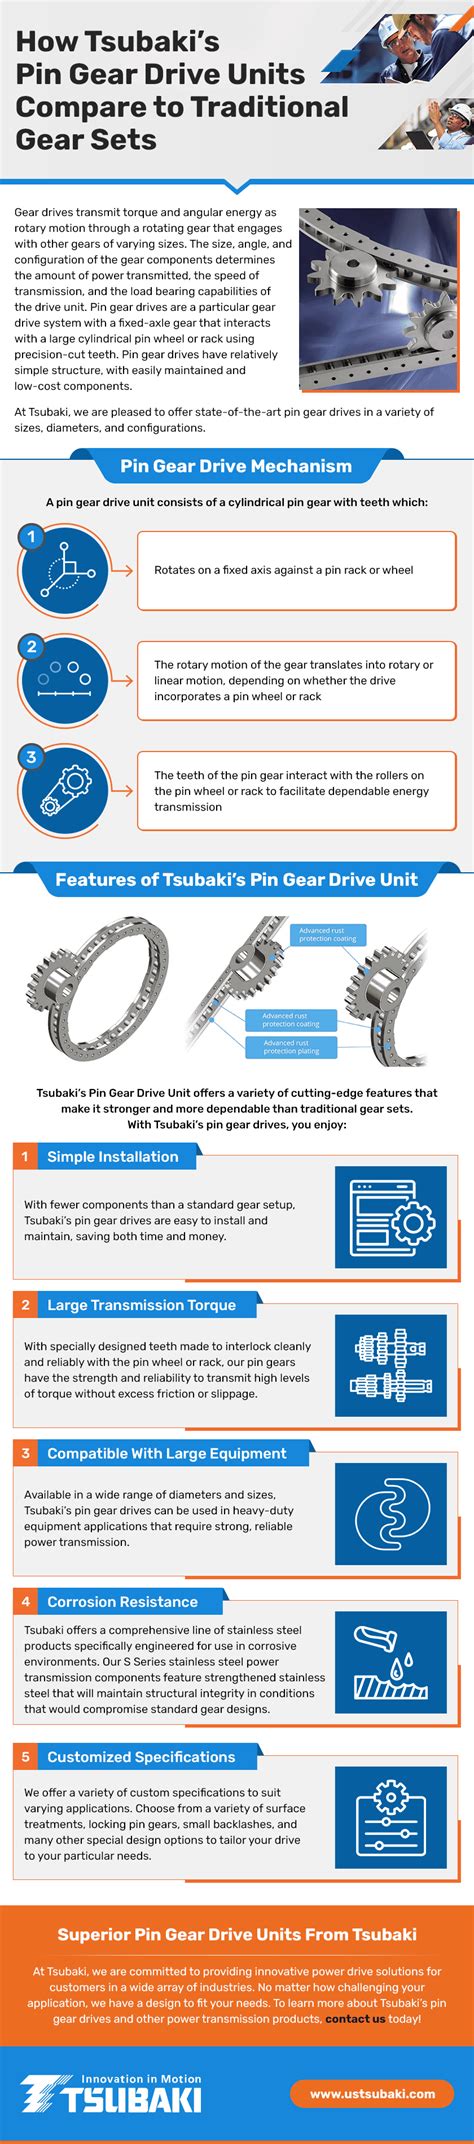 How Tsubakis Pin Gear Drive Units Compare To Traditional Gear Sets